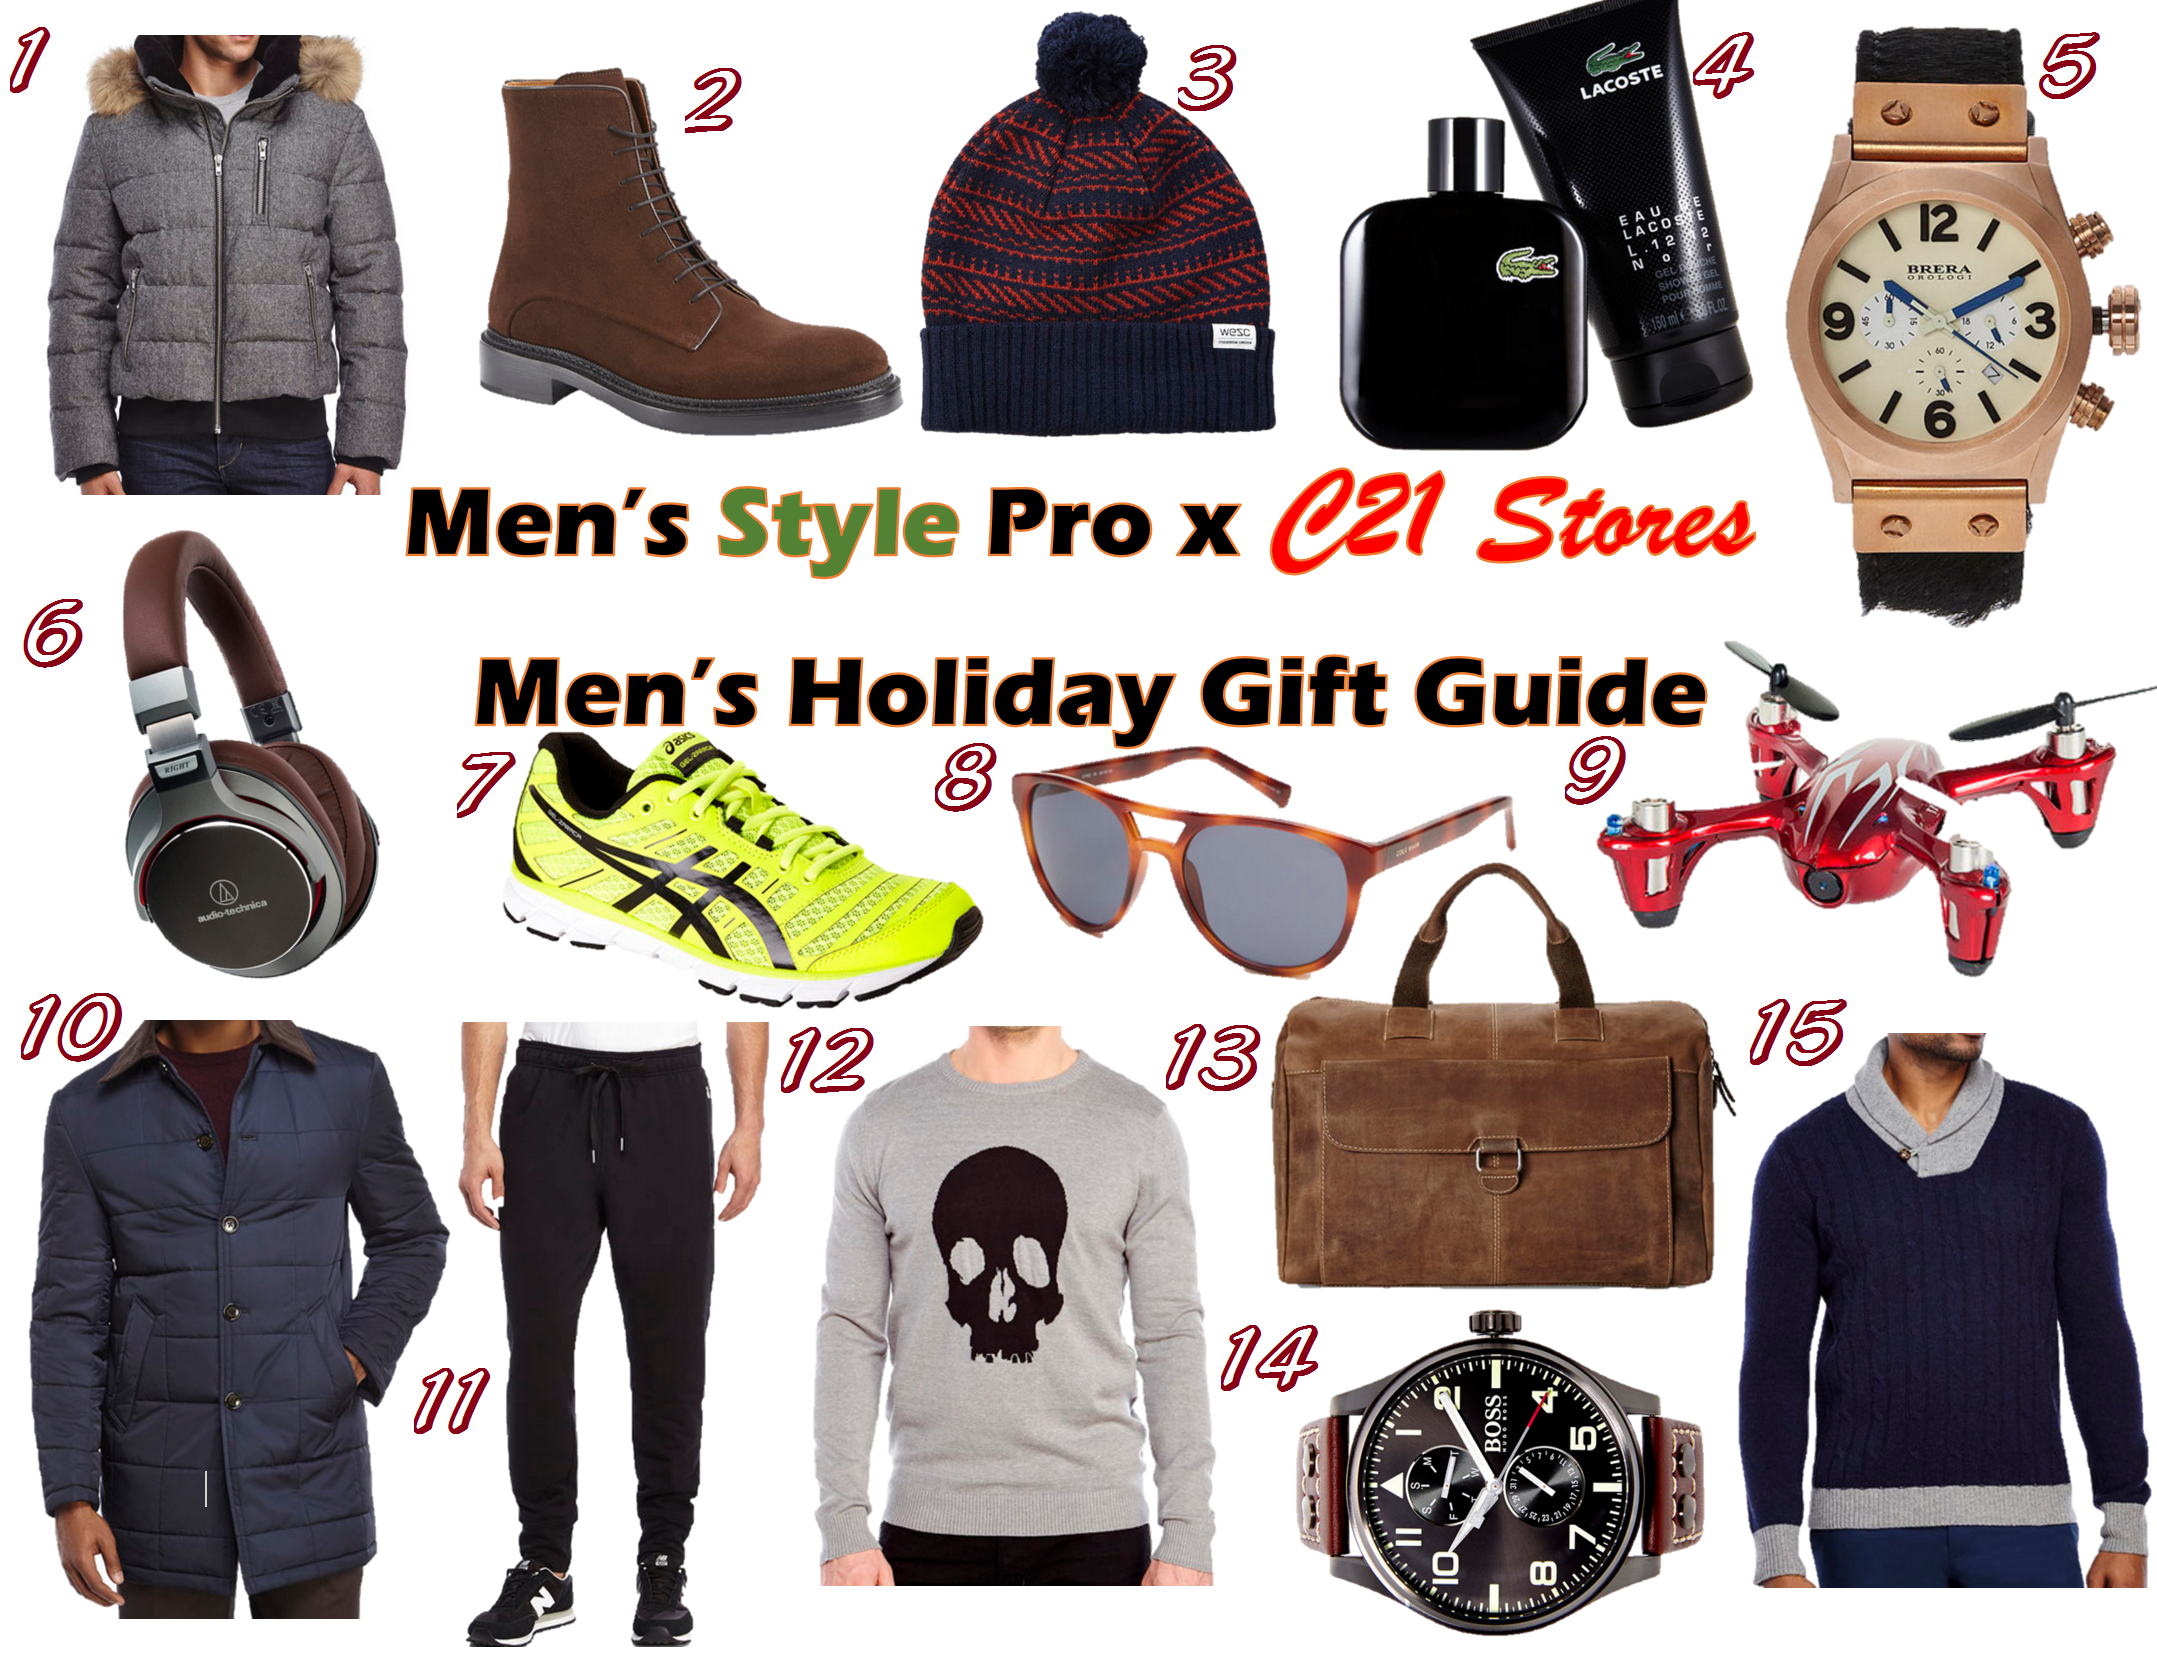 MSP x C21 Stores Men's Holiday Gift Guide Numbered